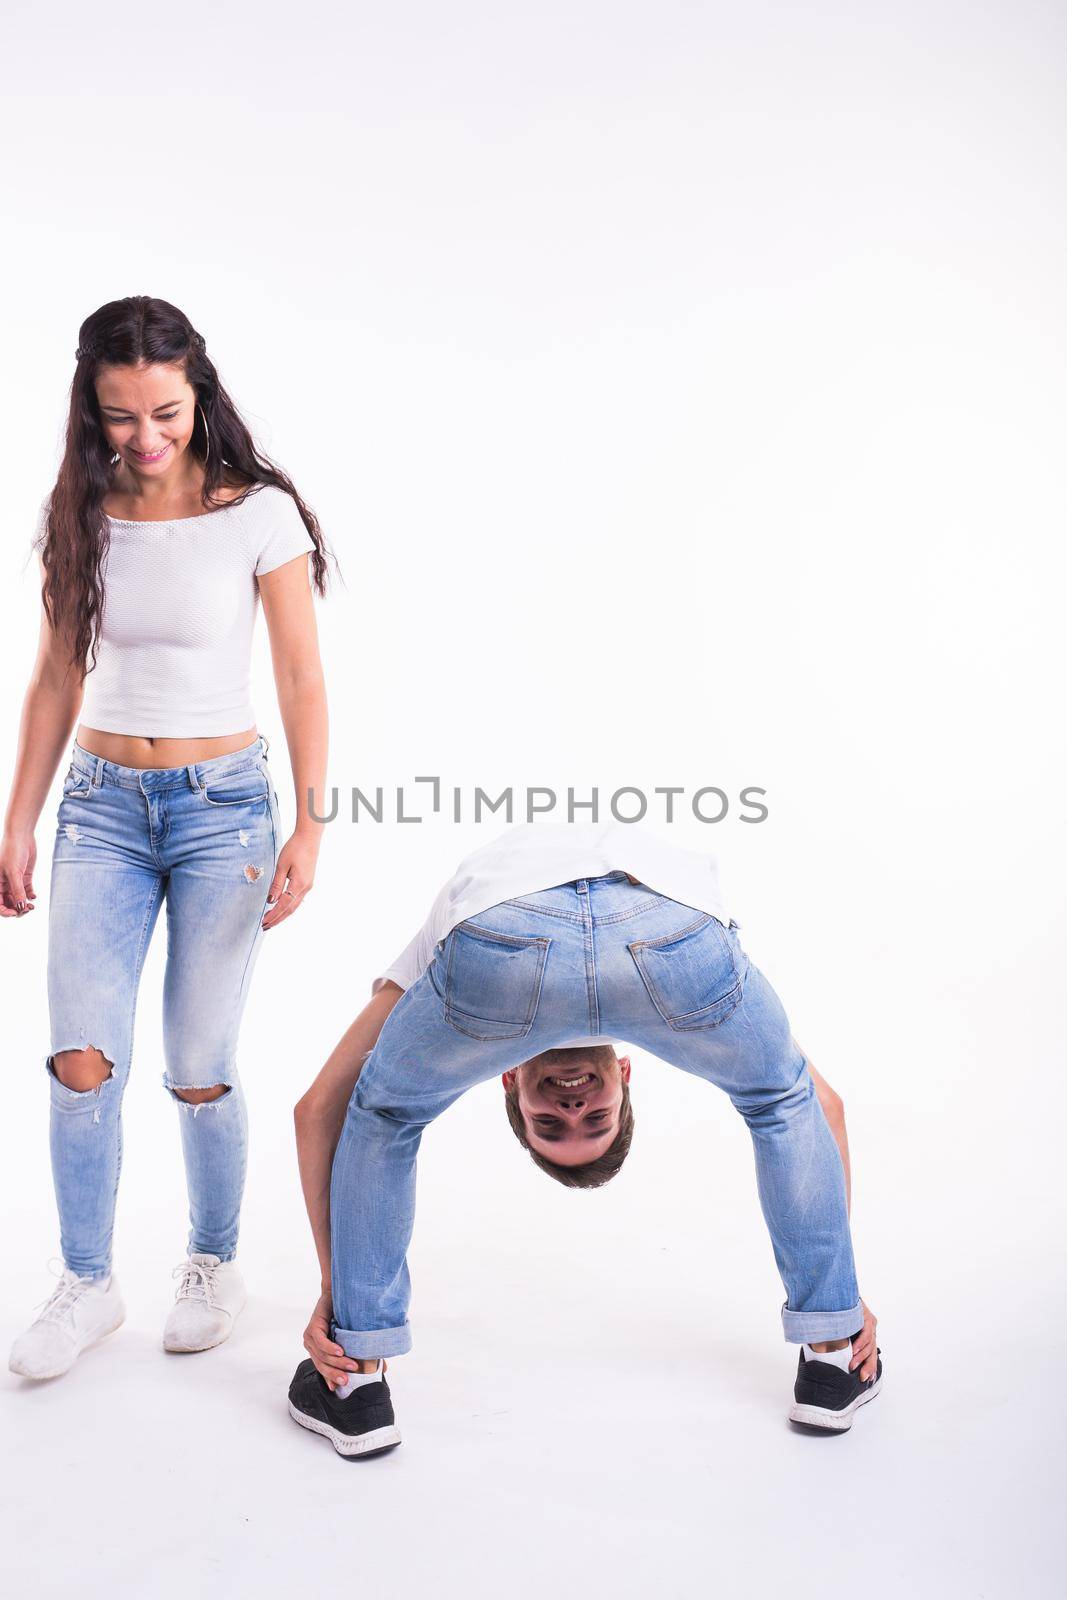 Concept of infantilism, fun and spontaneity - Young crazy mad man fool pose on white background. And pretty girl looks at him and laughs. by Satura86